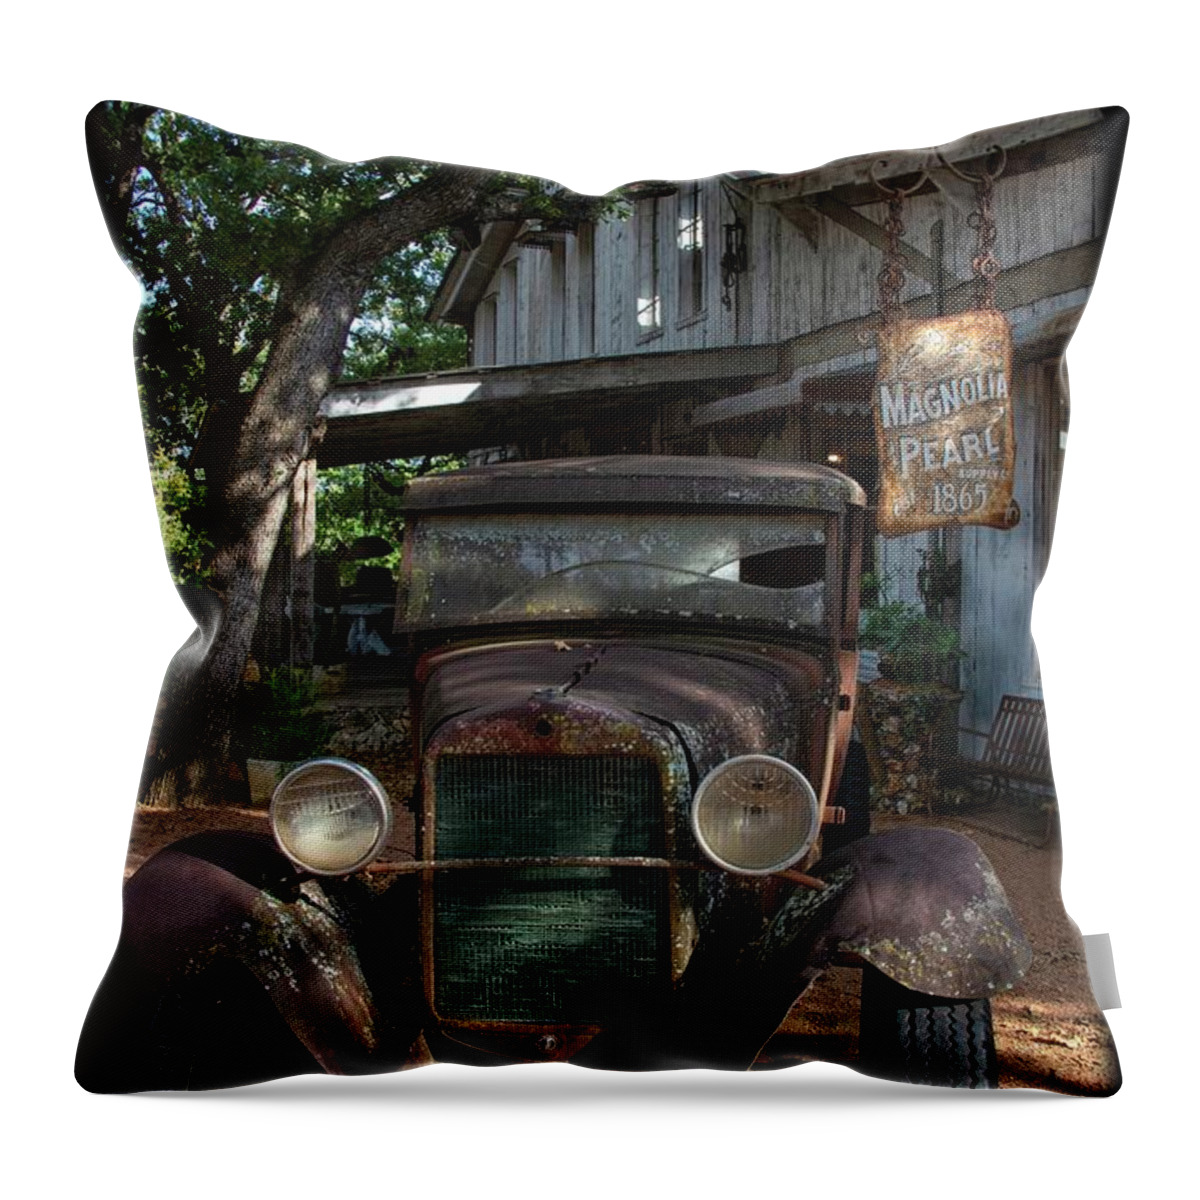 Texas Hill Country Throw Pillow featuring the photograph Vintage Charm of Magnolia Pearl in Fredericksburg by Lynn Bauer